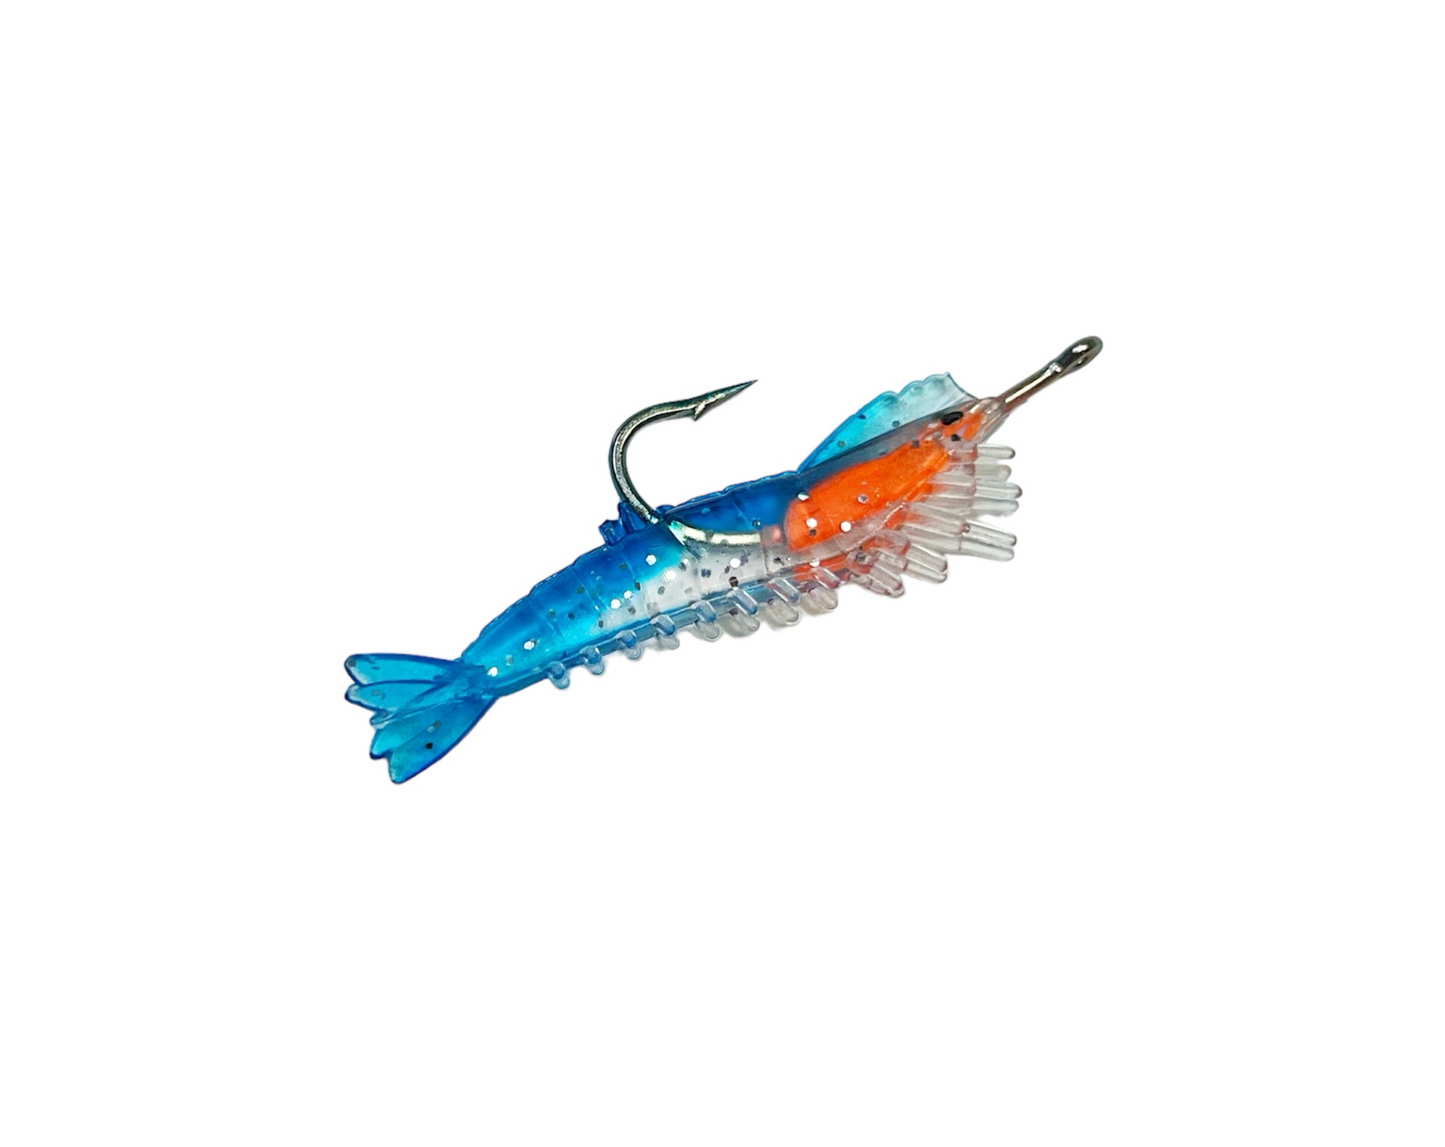 Pre Rigged Weighted Soft Shrimp (1 Piece - Blue)